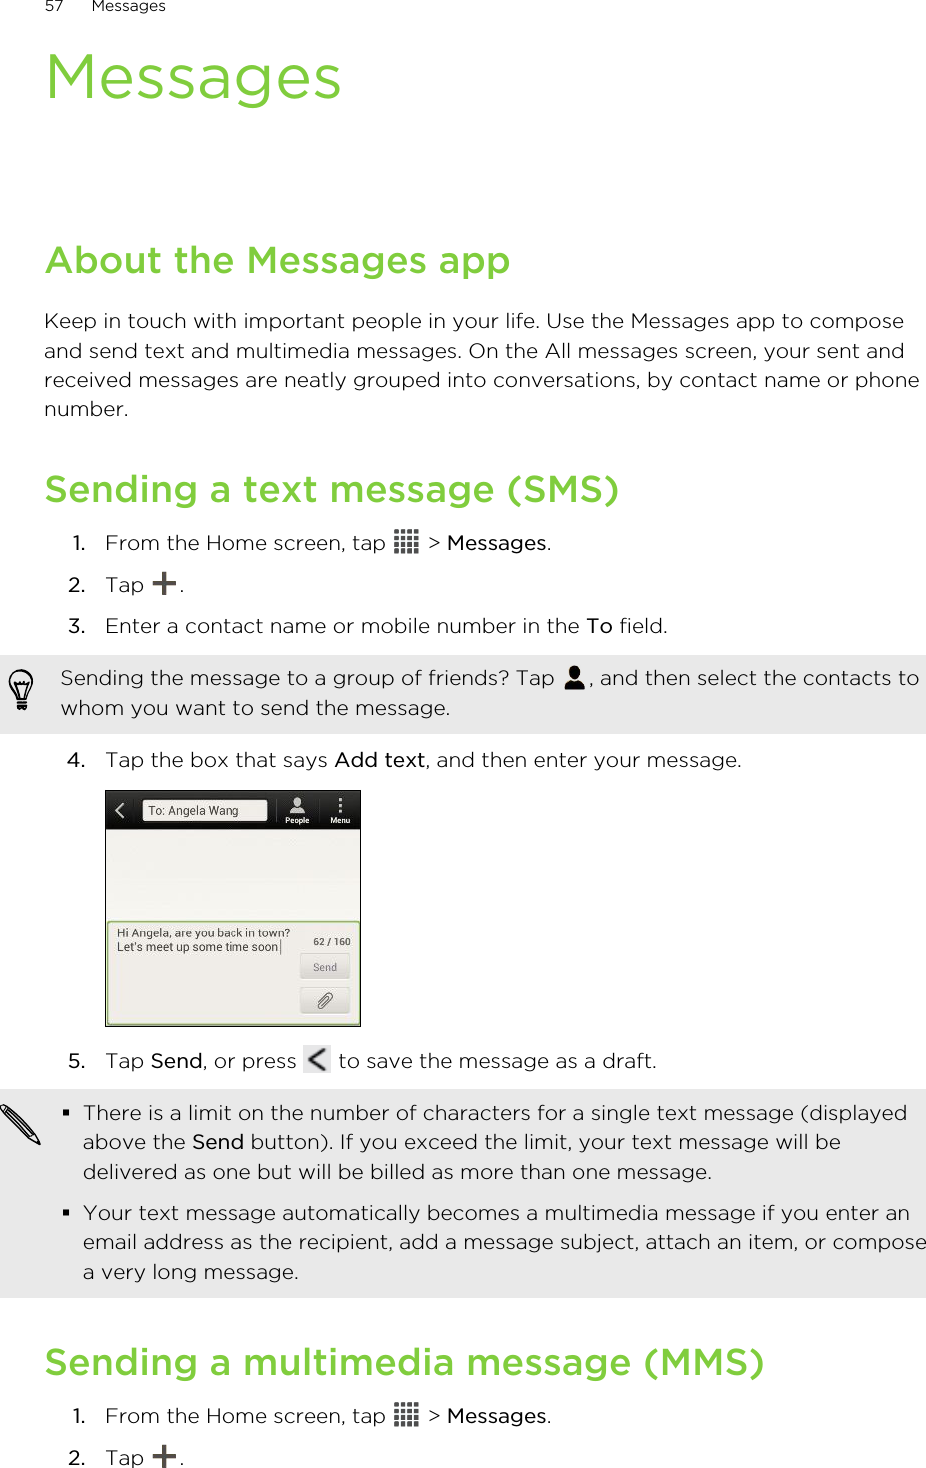 MessagesAbout the Messages appKeep in touch with important people in your life. Use the Messages app to composeand send text and multimedia messages. On the All messages screen, your sent andreceived messages are neatly grouped into conversations, by contact name or phonenumber.Sending a text message (SMS)1. From the Home screen, tap   &gt; Messages.2. Tap  .3. Enter a contact name or mobile number in the To field. Sending the message to a group of friends? Tap  , and then select the contacts towhom you want to send the message.4. Tap the box that says Add text, and then enter your message. 5. Tap Send, or press   to save the message as a draft. §There is a limit on the number of characters for a single text message (displayedabove the Send button). If you exceed the limit, your text message will bedelivered as one but will be billed as more than one message.§Your text message automatically becomes a multimedia message if you enter anemail address as the recipient, add a message subject, attach an item, or composea very long message.Sending a multimedia message (MMS)1. From the Home screen, tap   &gt; Messages.2. Tap  .57 Messages